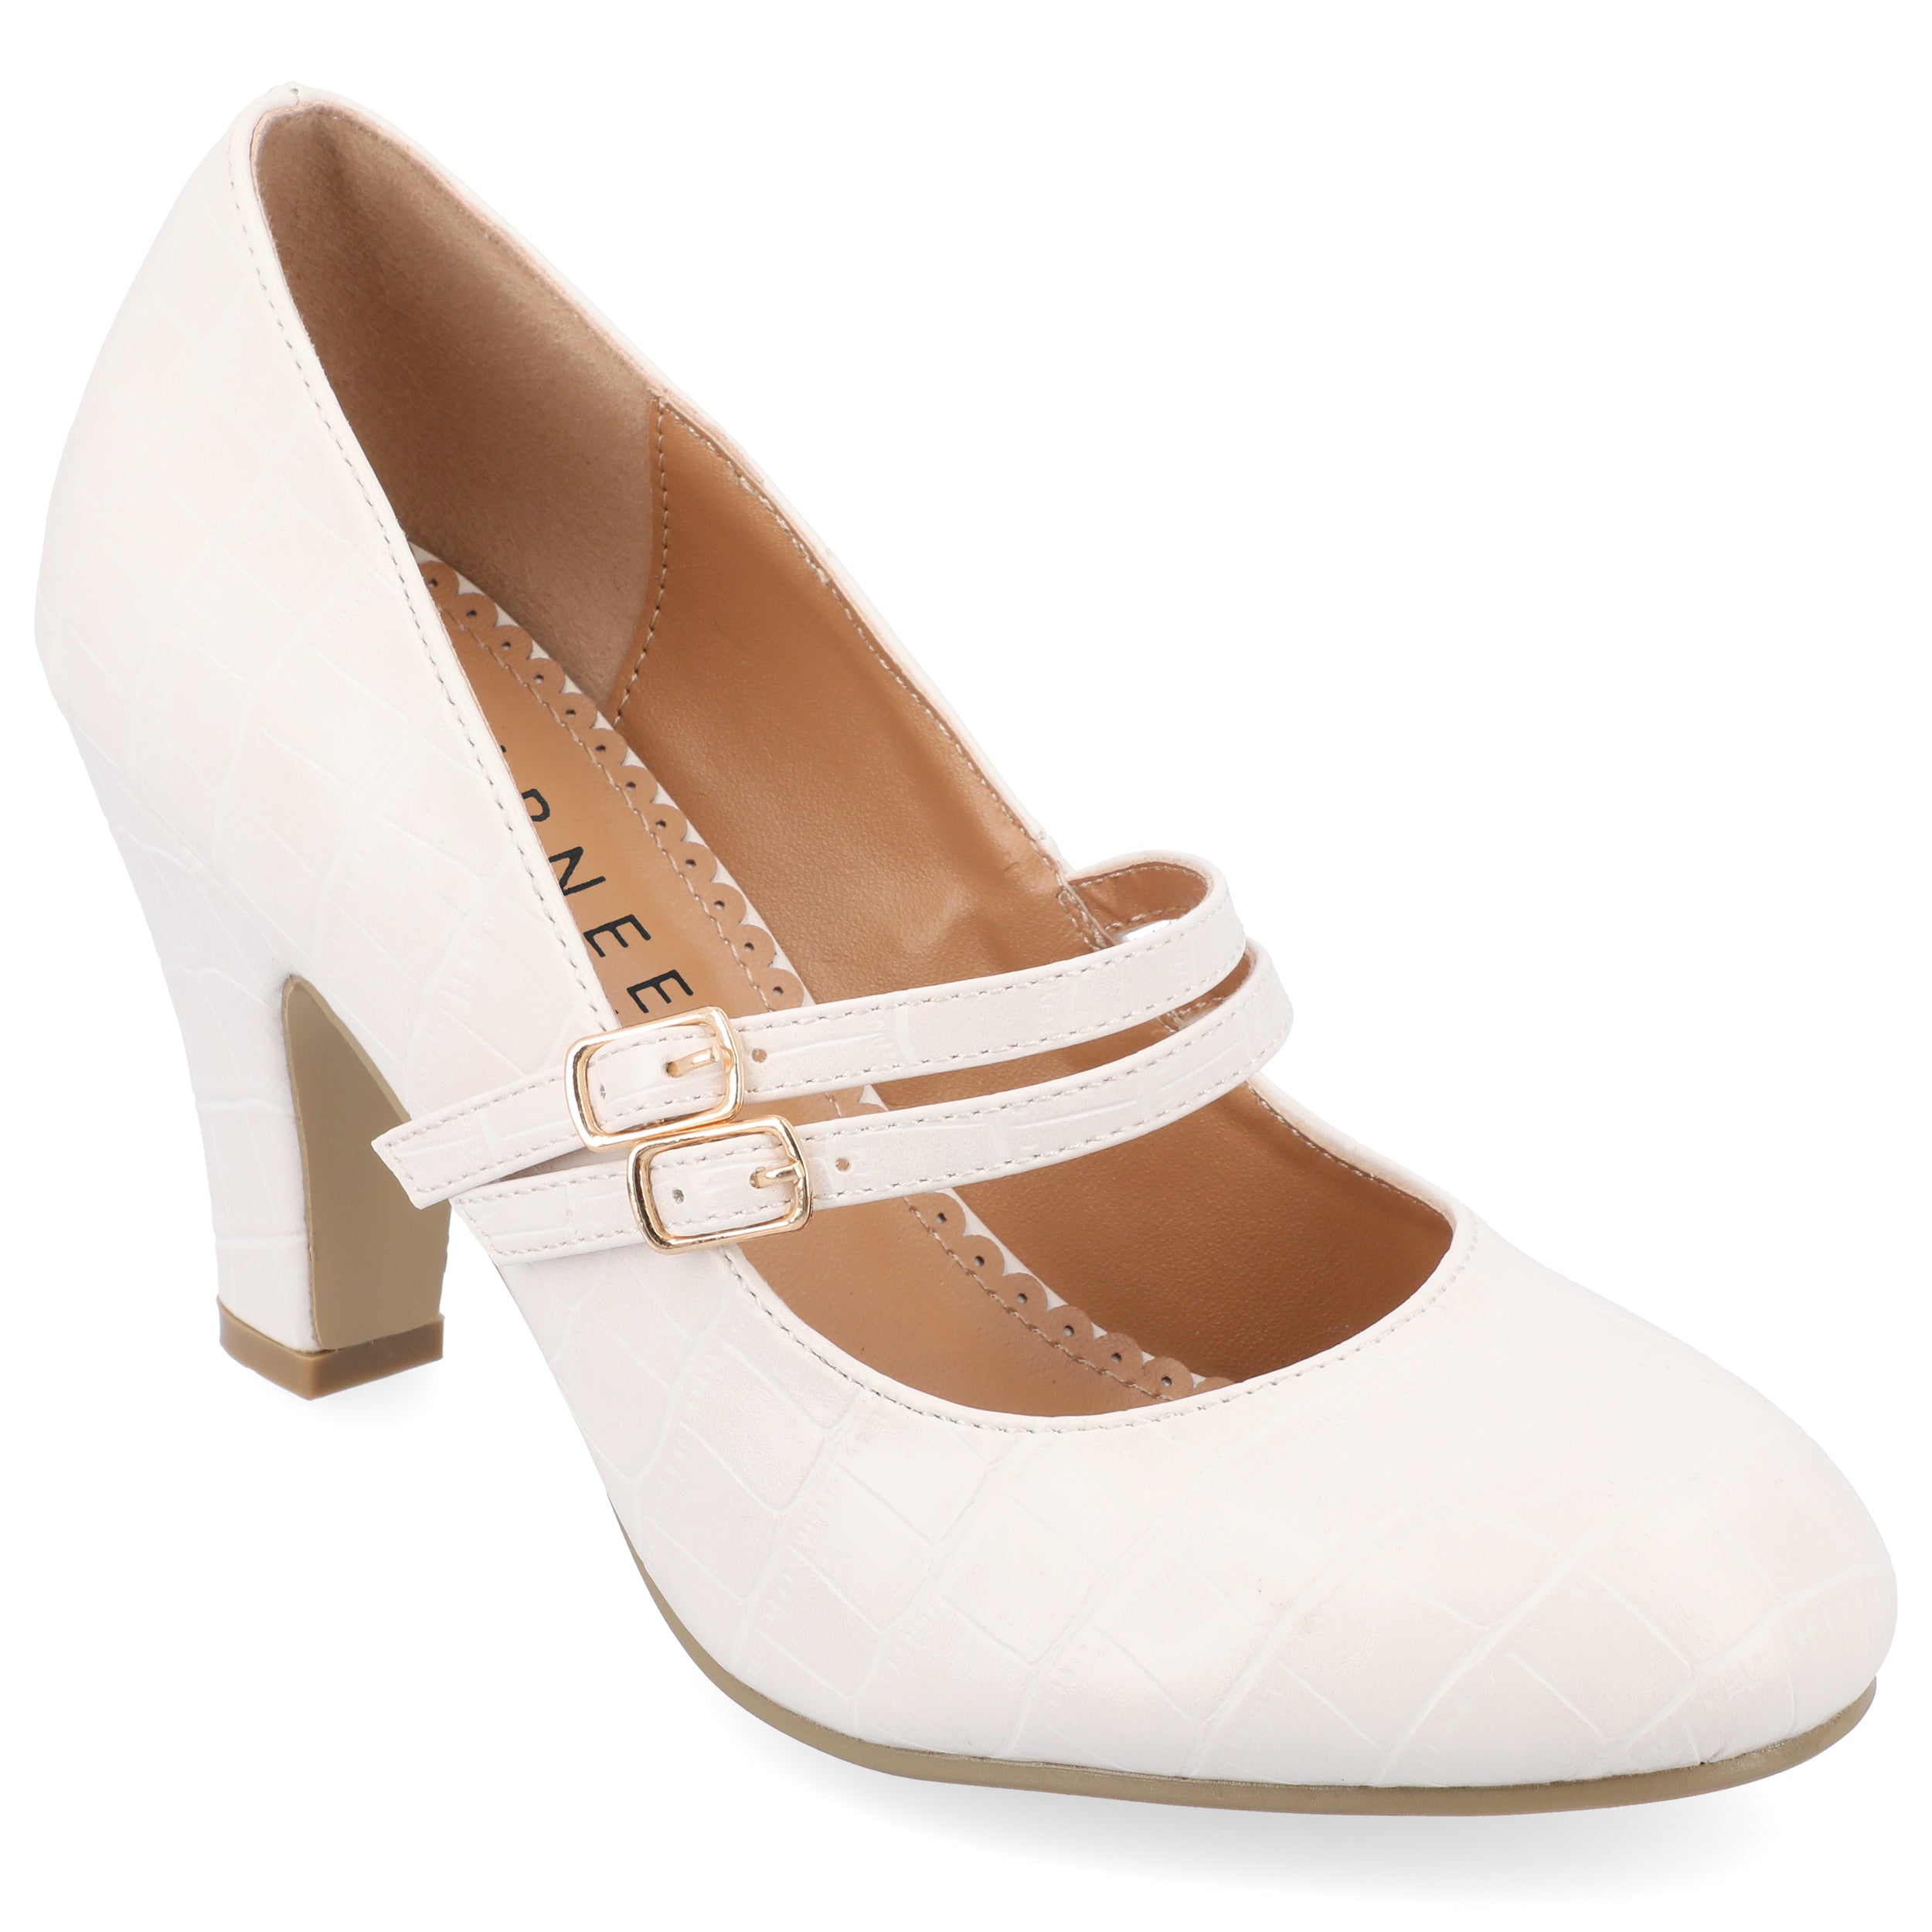 TOP-TIER Jeffrey Campbell Mary-Janes